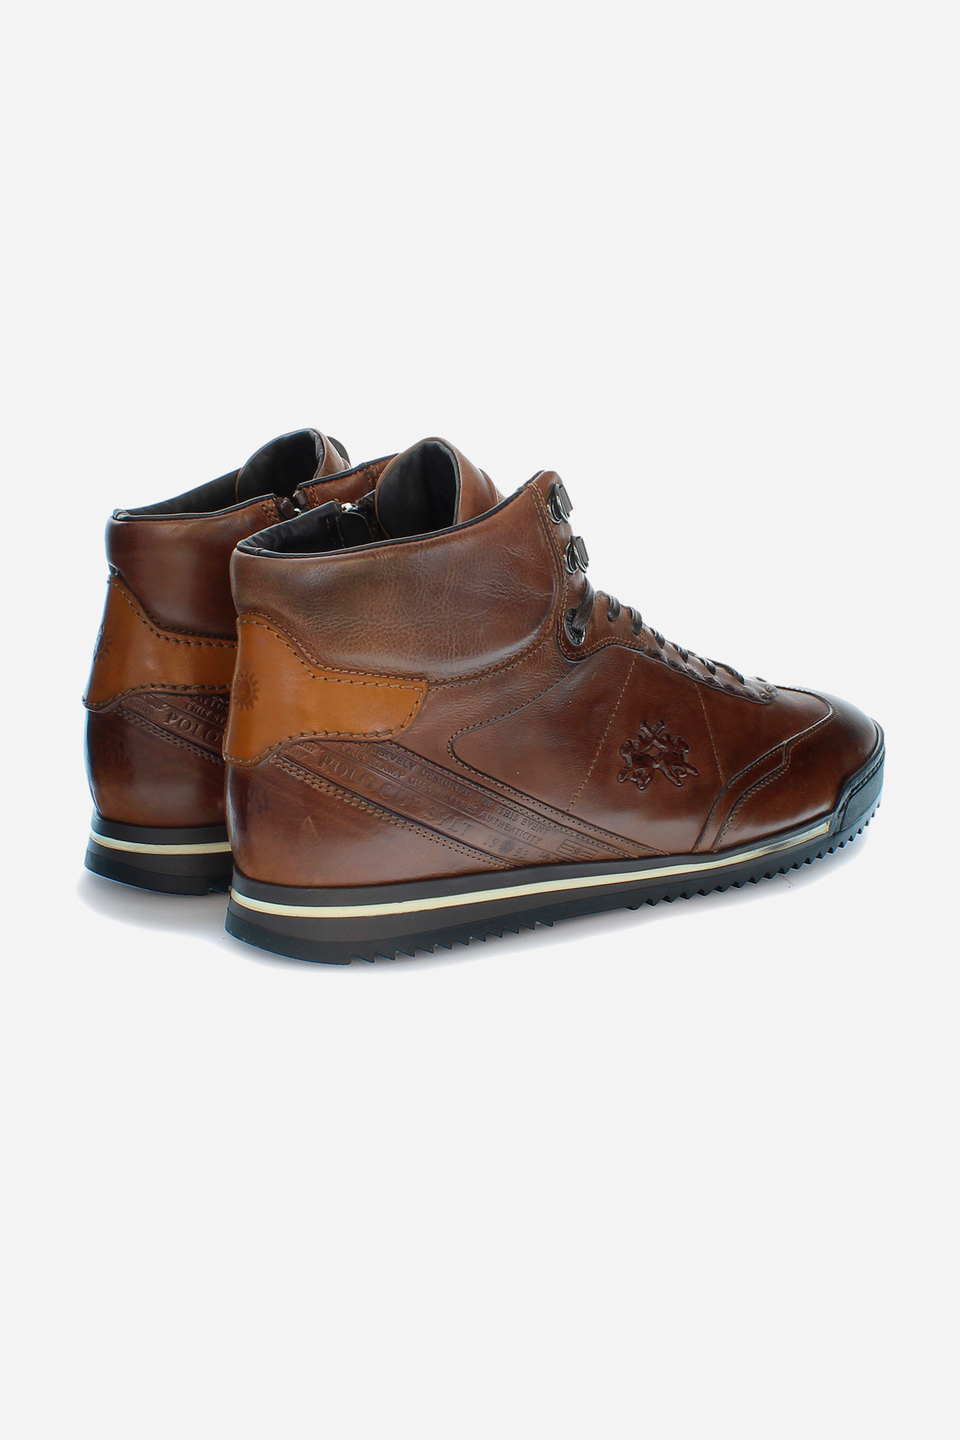 High-top men's trainer in calfskin with contrasting leather inserts | La Martina - Official Online Shop